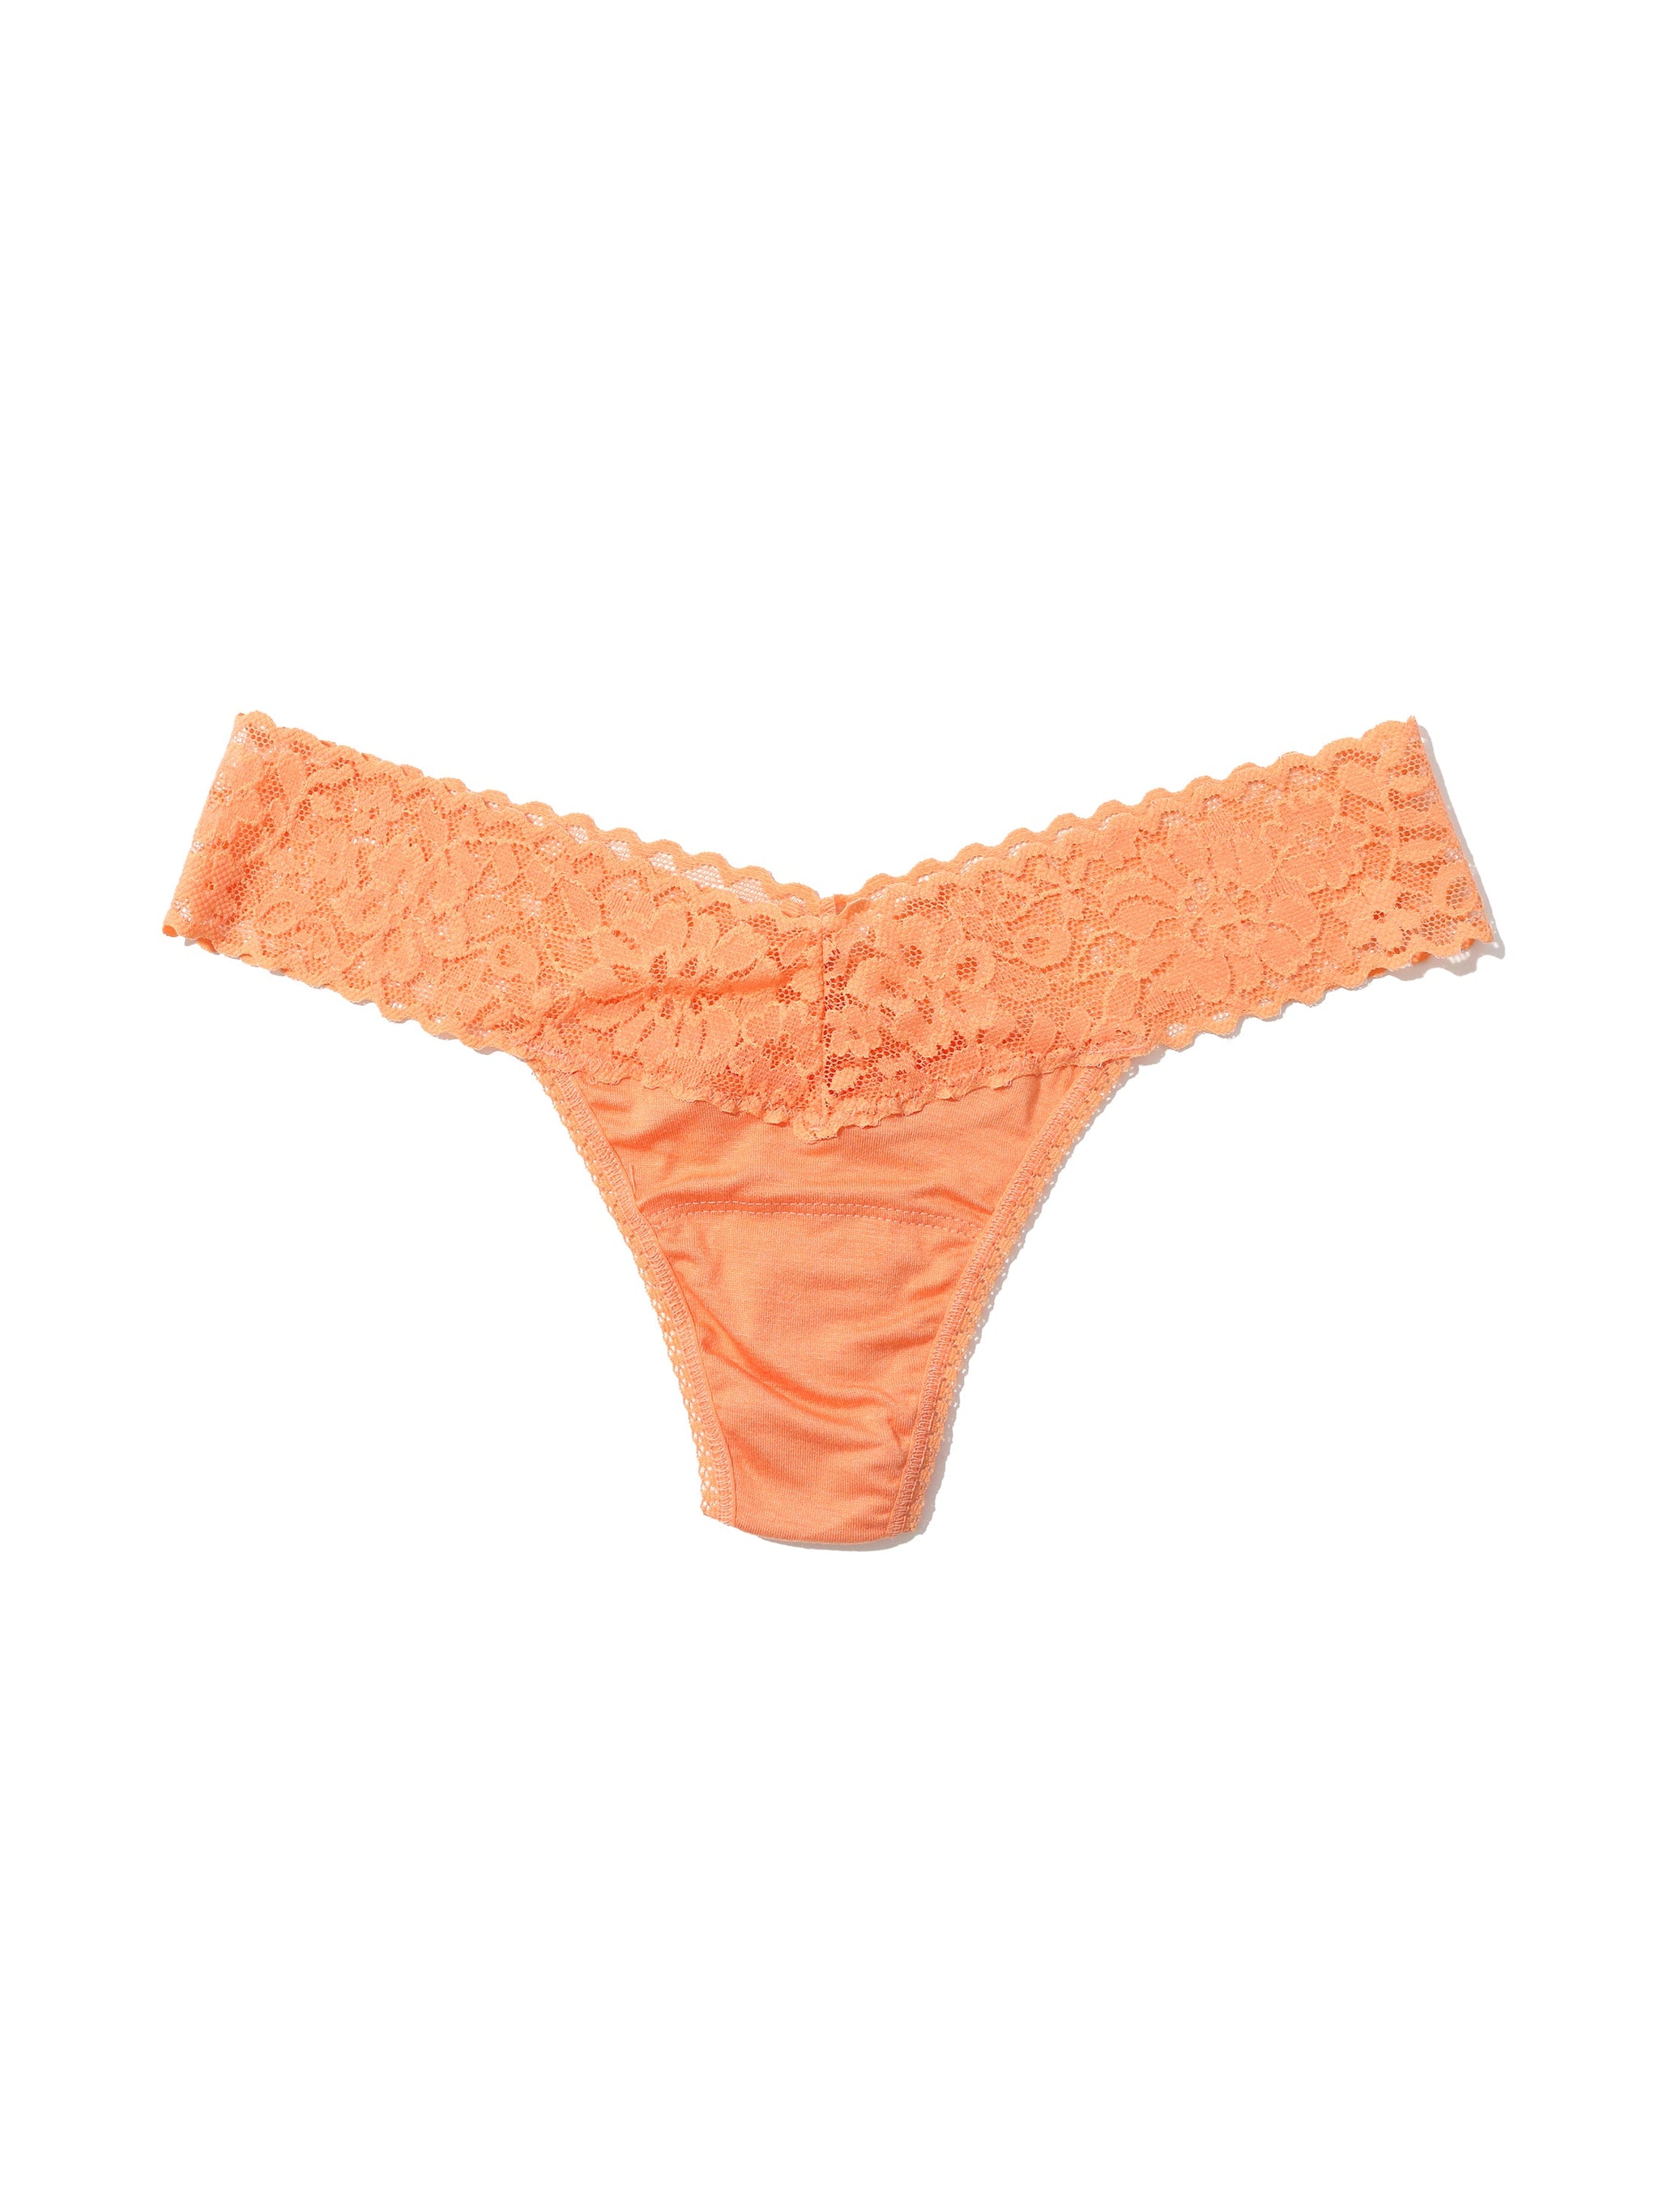 Hanky Panky For Hello Kitty: Skivvies Get Seriously Cute This Spring